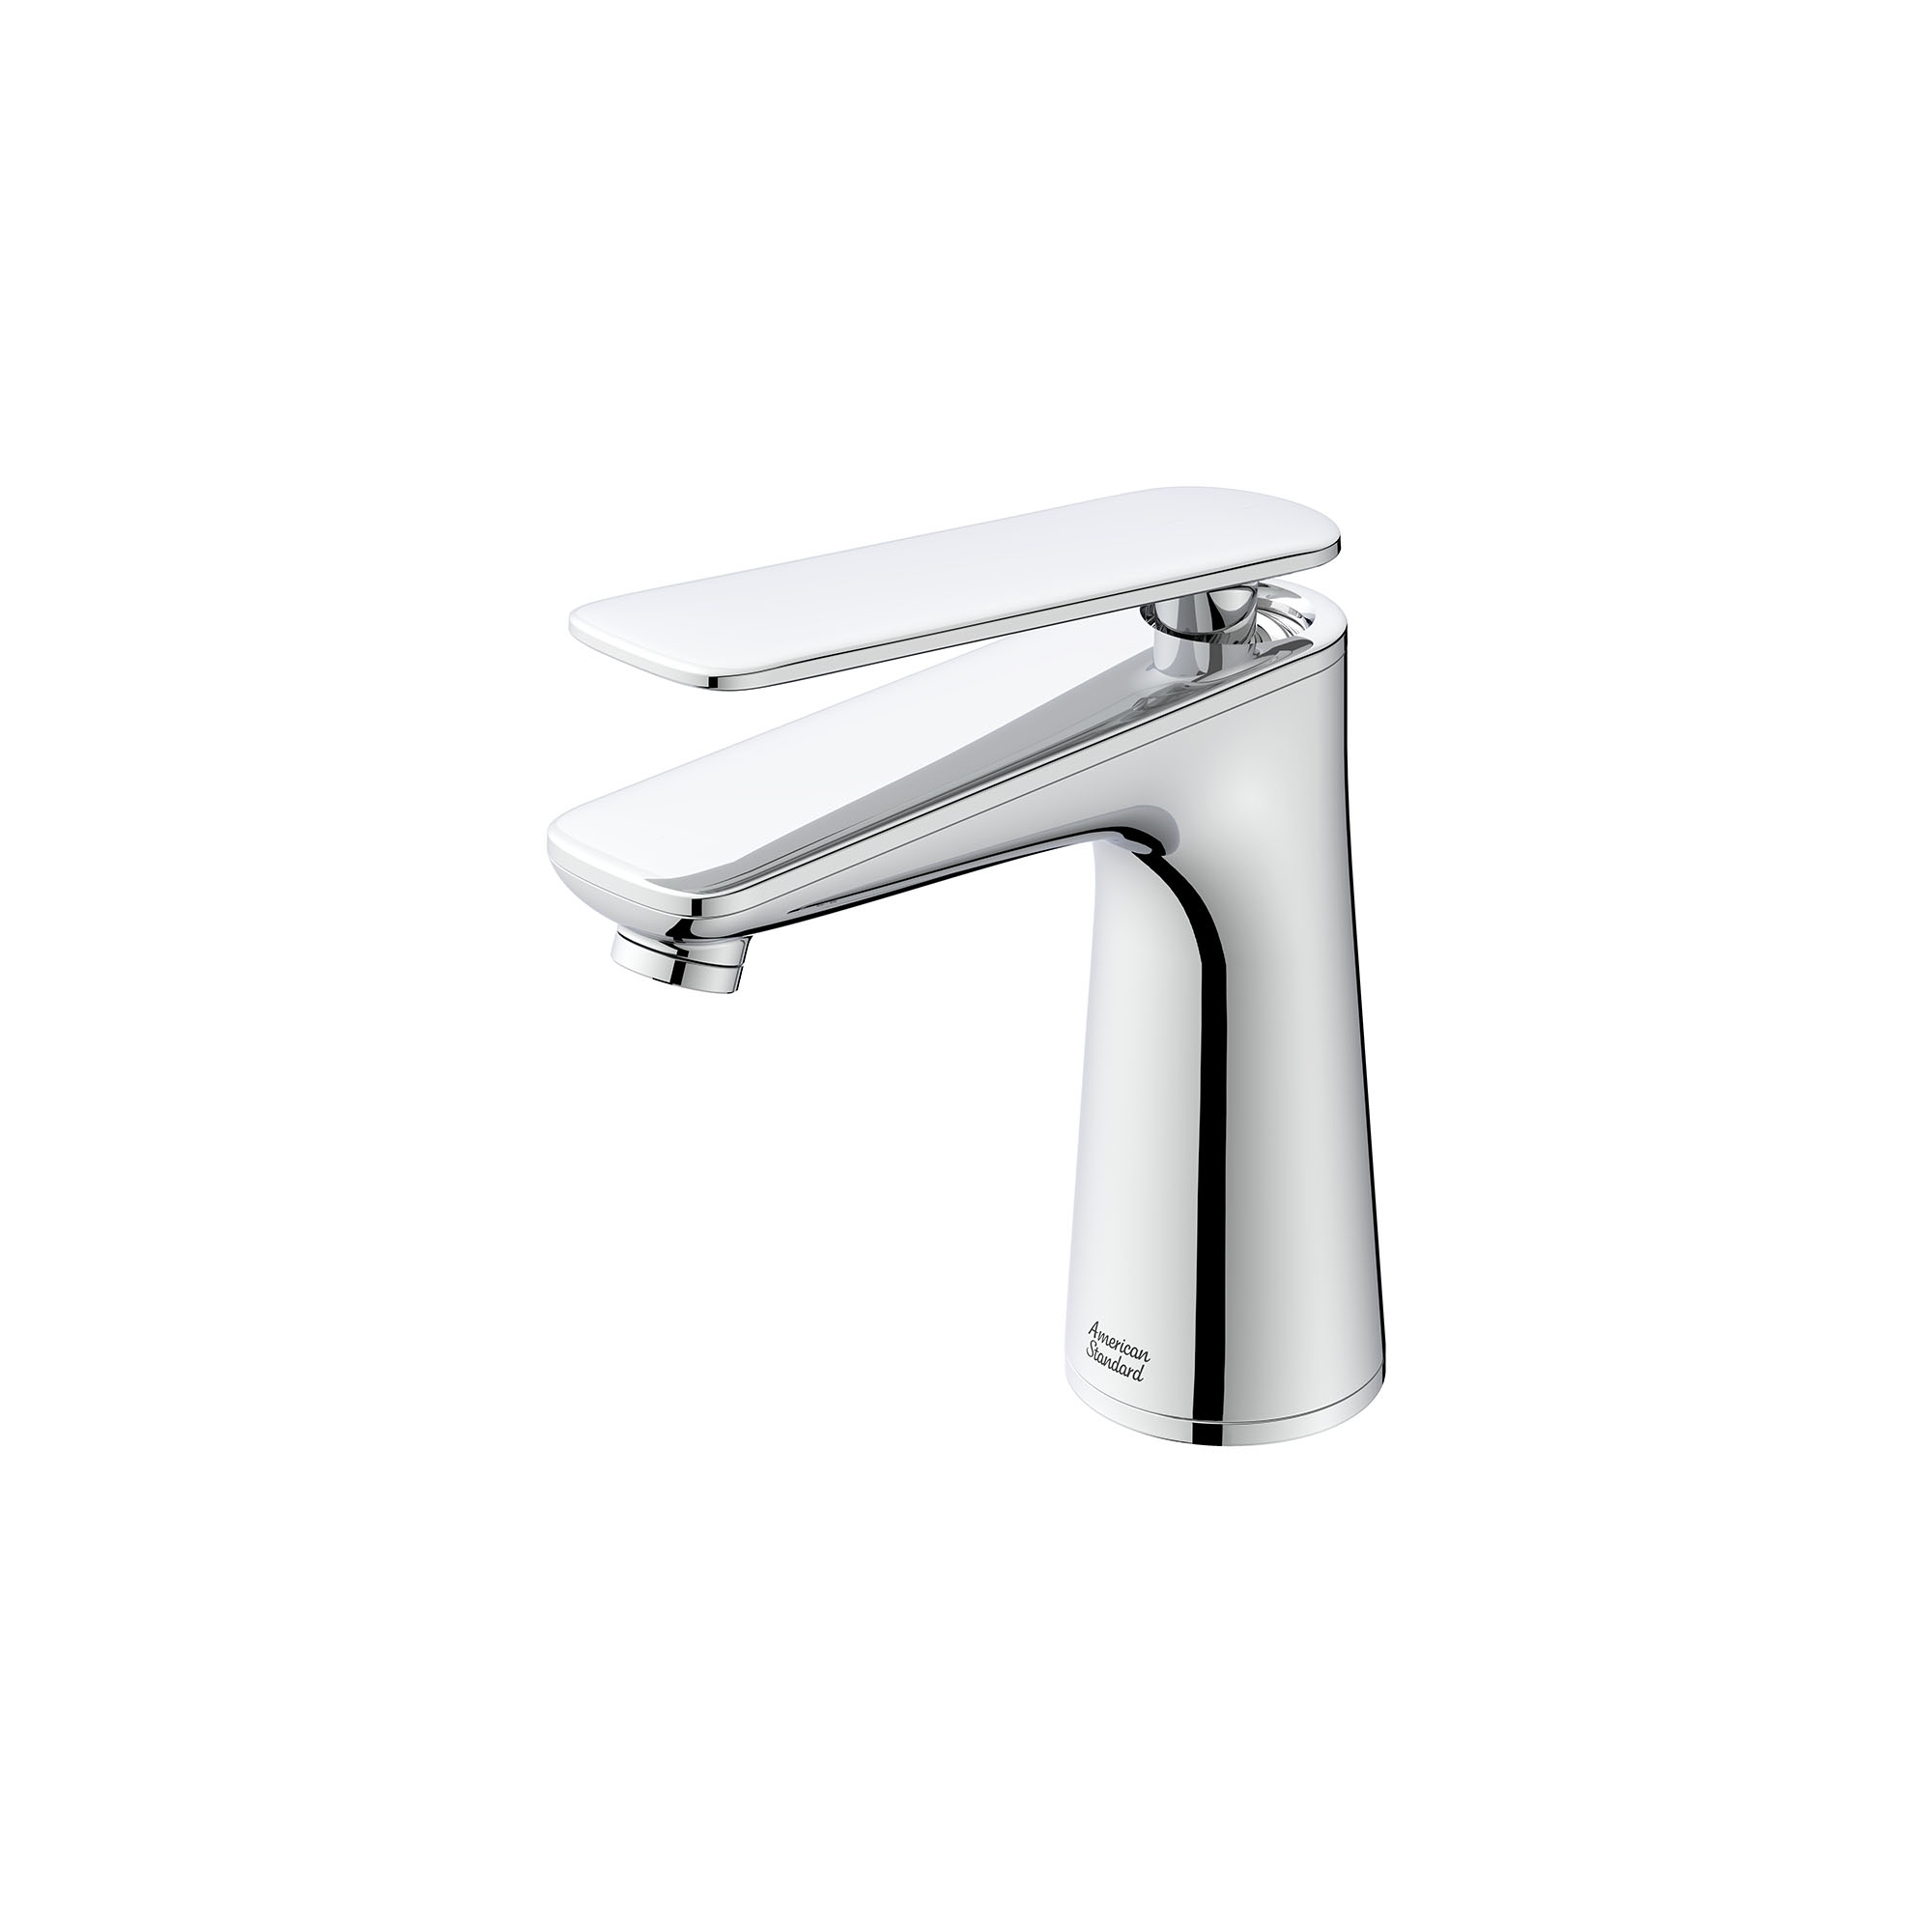 Aspirations™ Single-Handle Bathroom Faucet 1.2 gpm/4.5 L/min With Lever Handle Less Drain